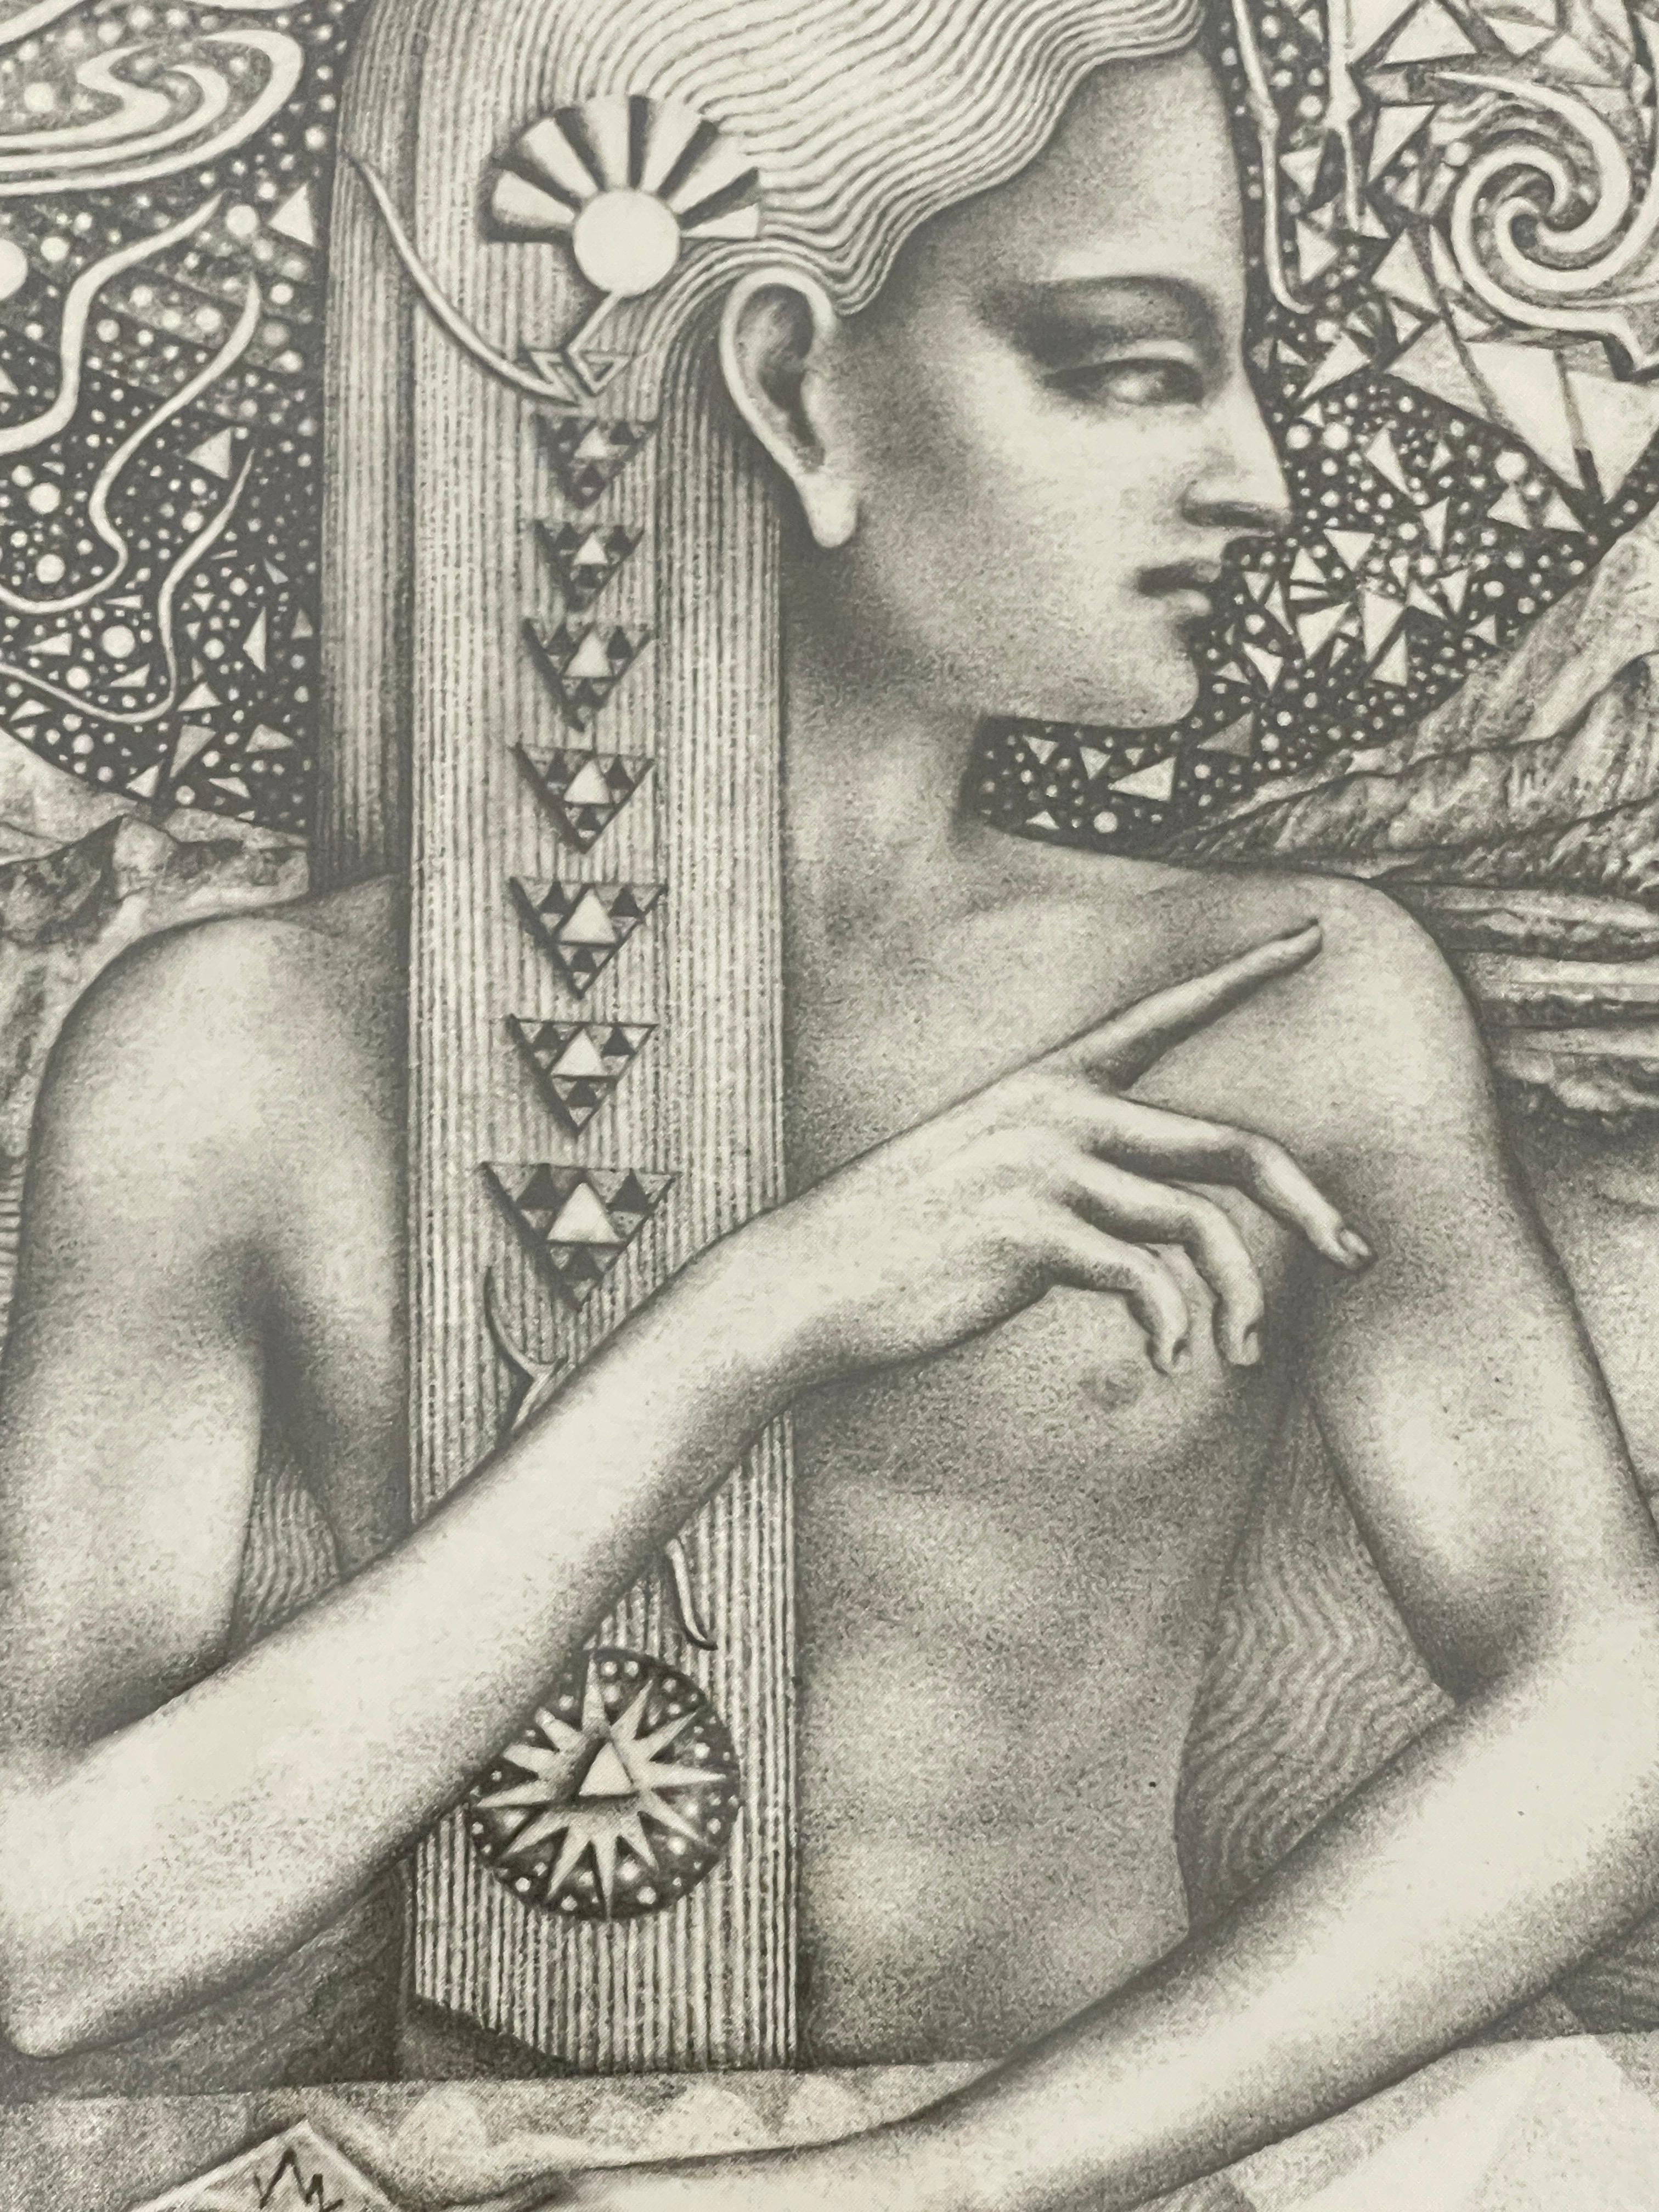 Visionary Art of John Swingdler 'Oracle' and 'The Wanderes' Repro Signed in Pencil